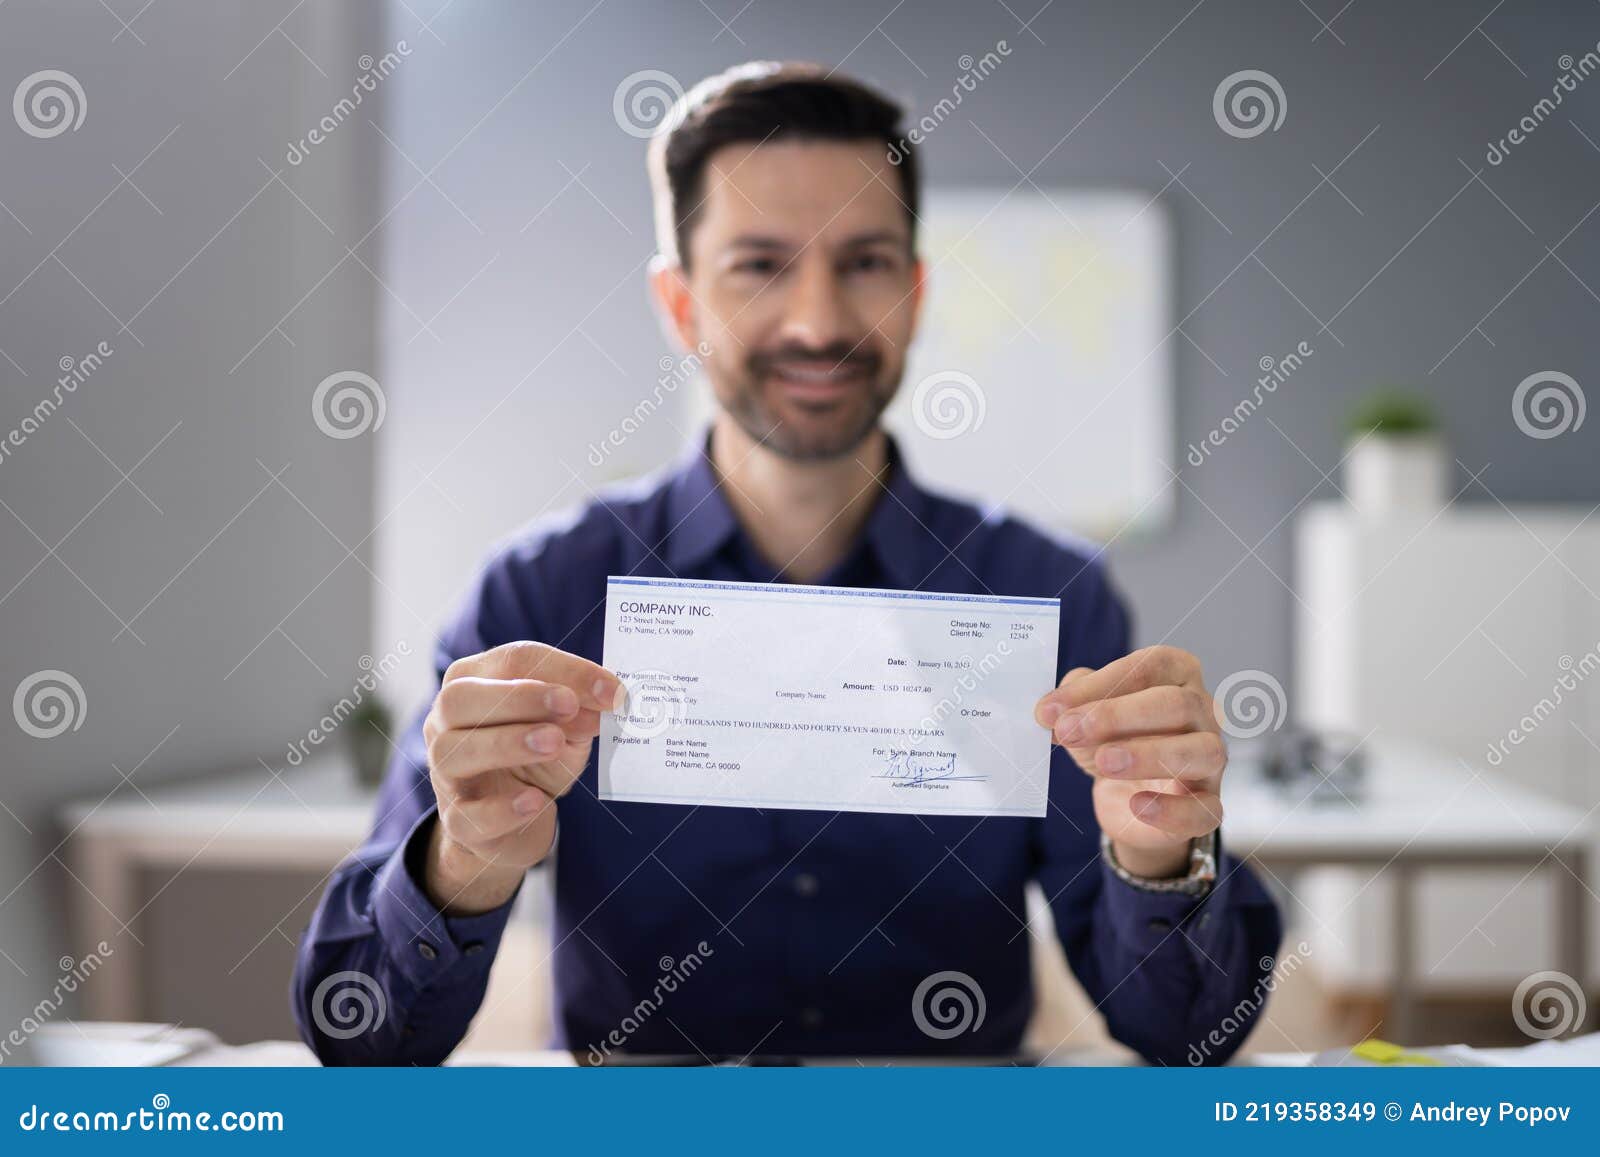 smiling businessman holding cheque